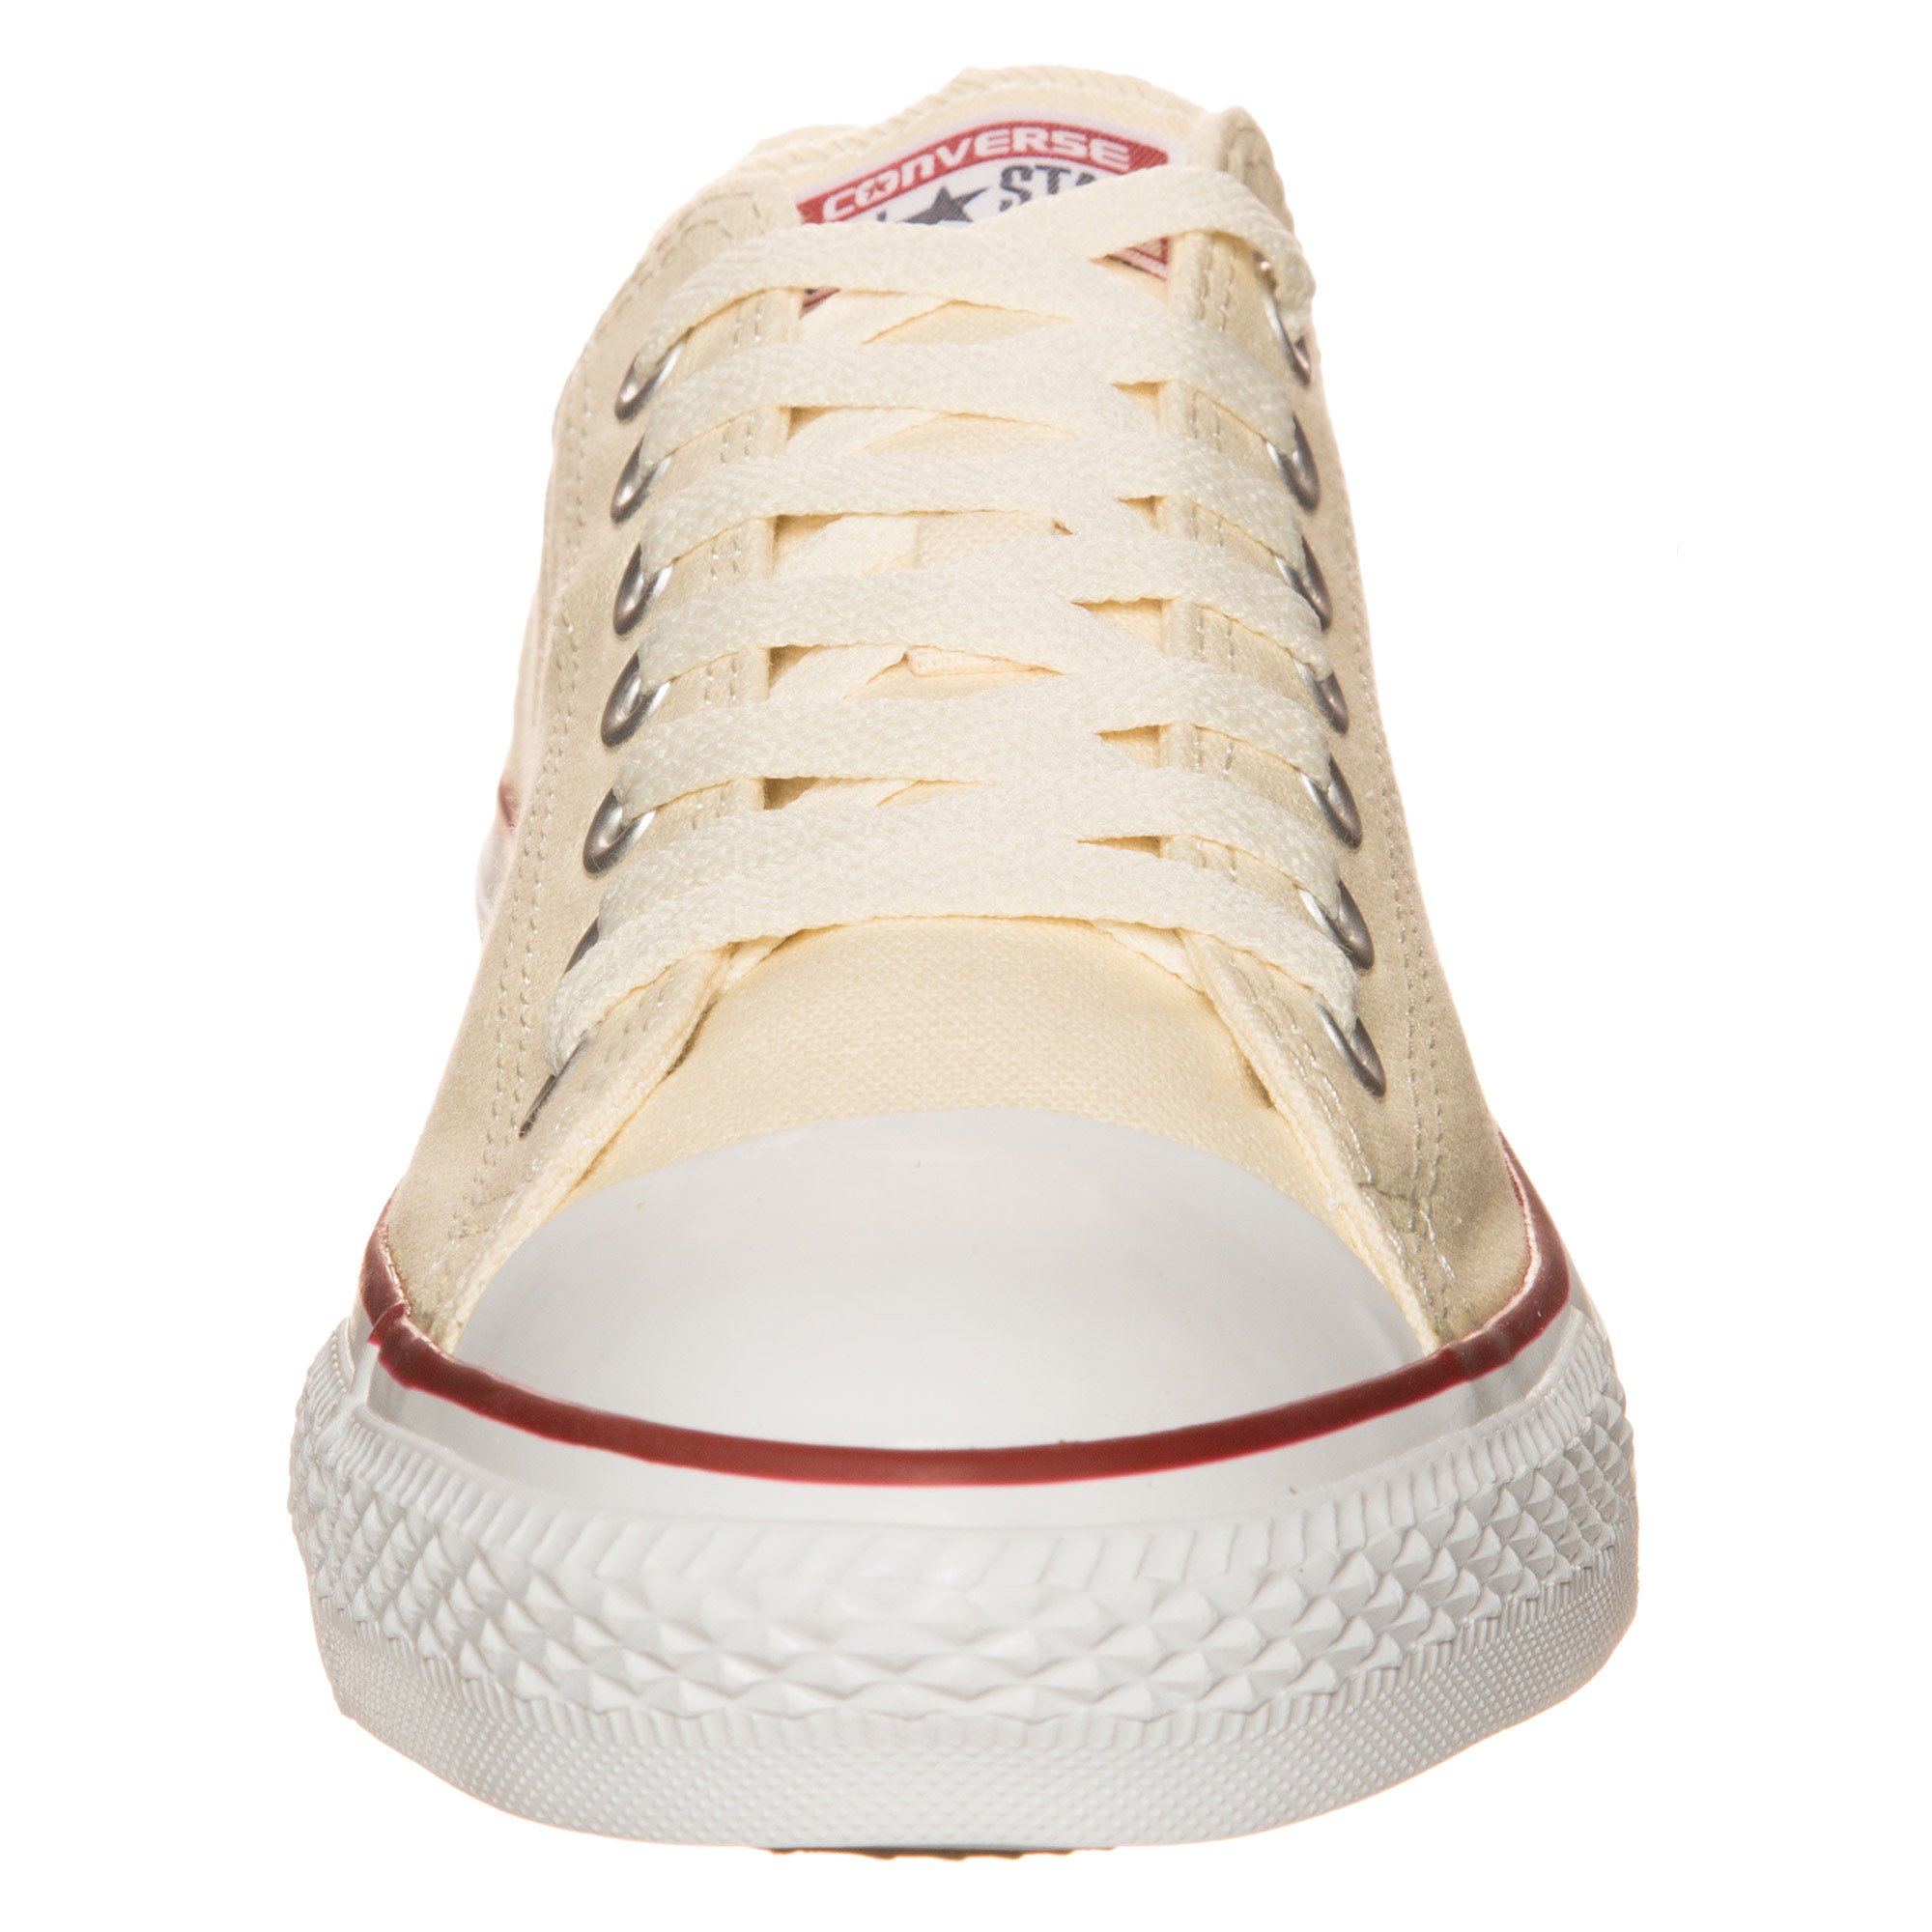 Converse Unisex Chuck Taylor All Star Low Top Natural White Sneakers - 8 B(M) US Women / 6 D(M) US Men